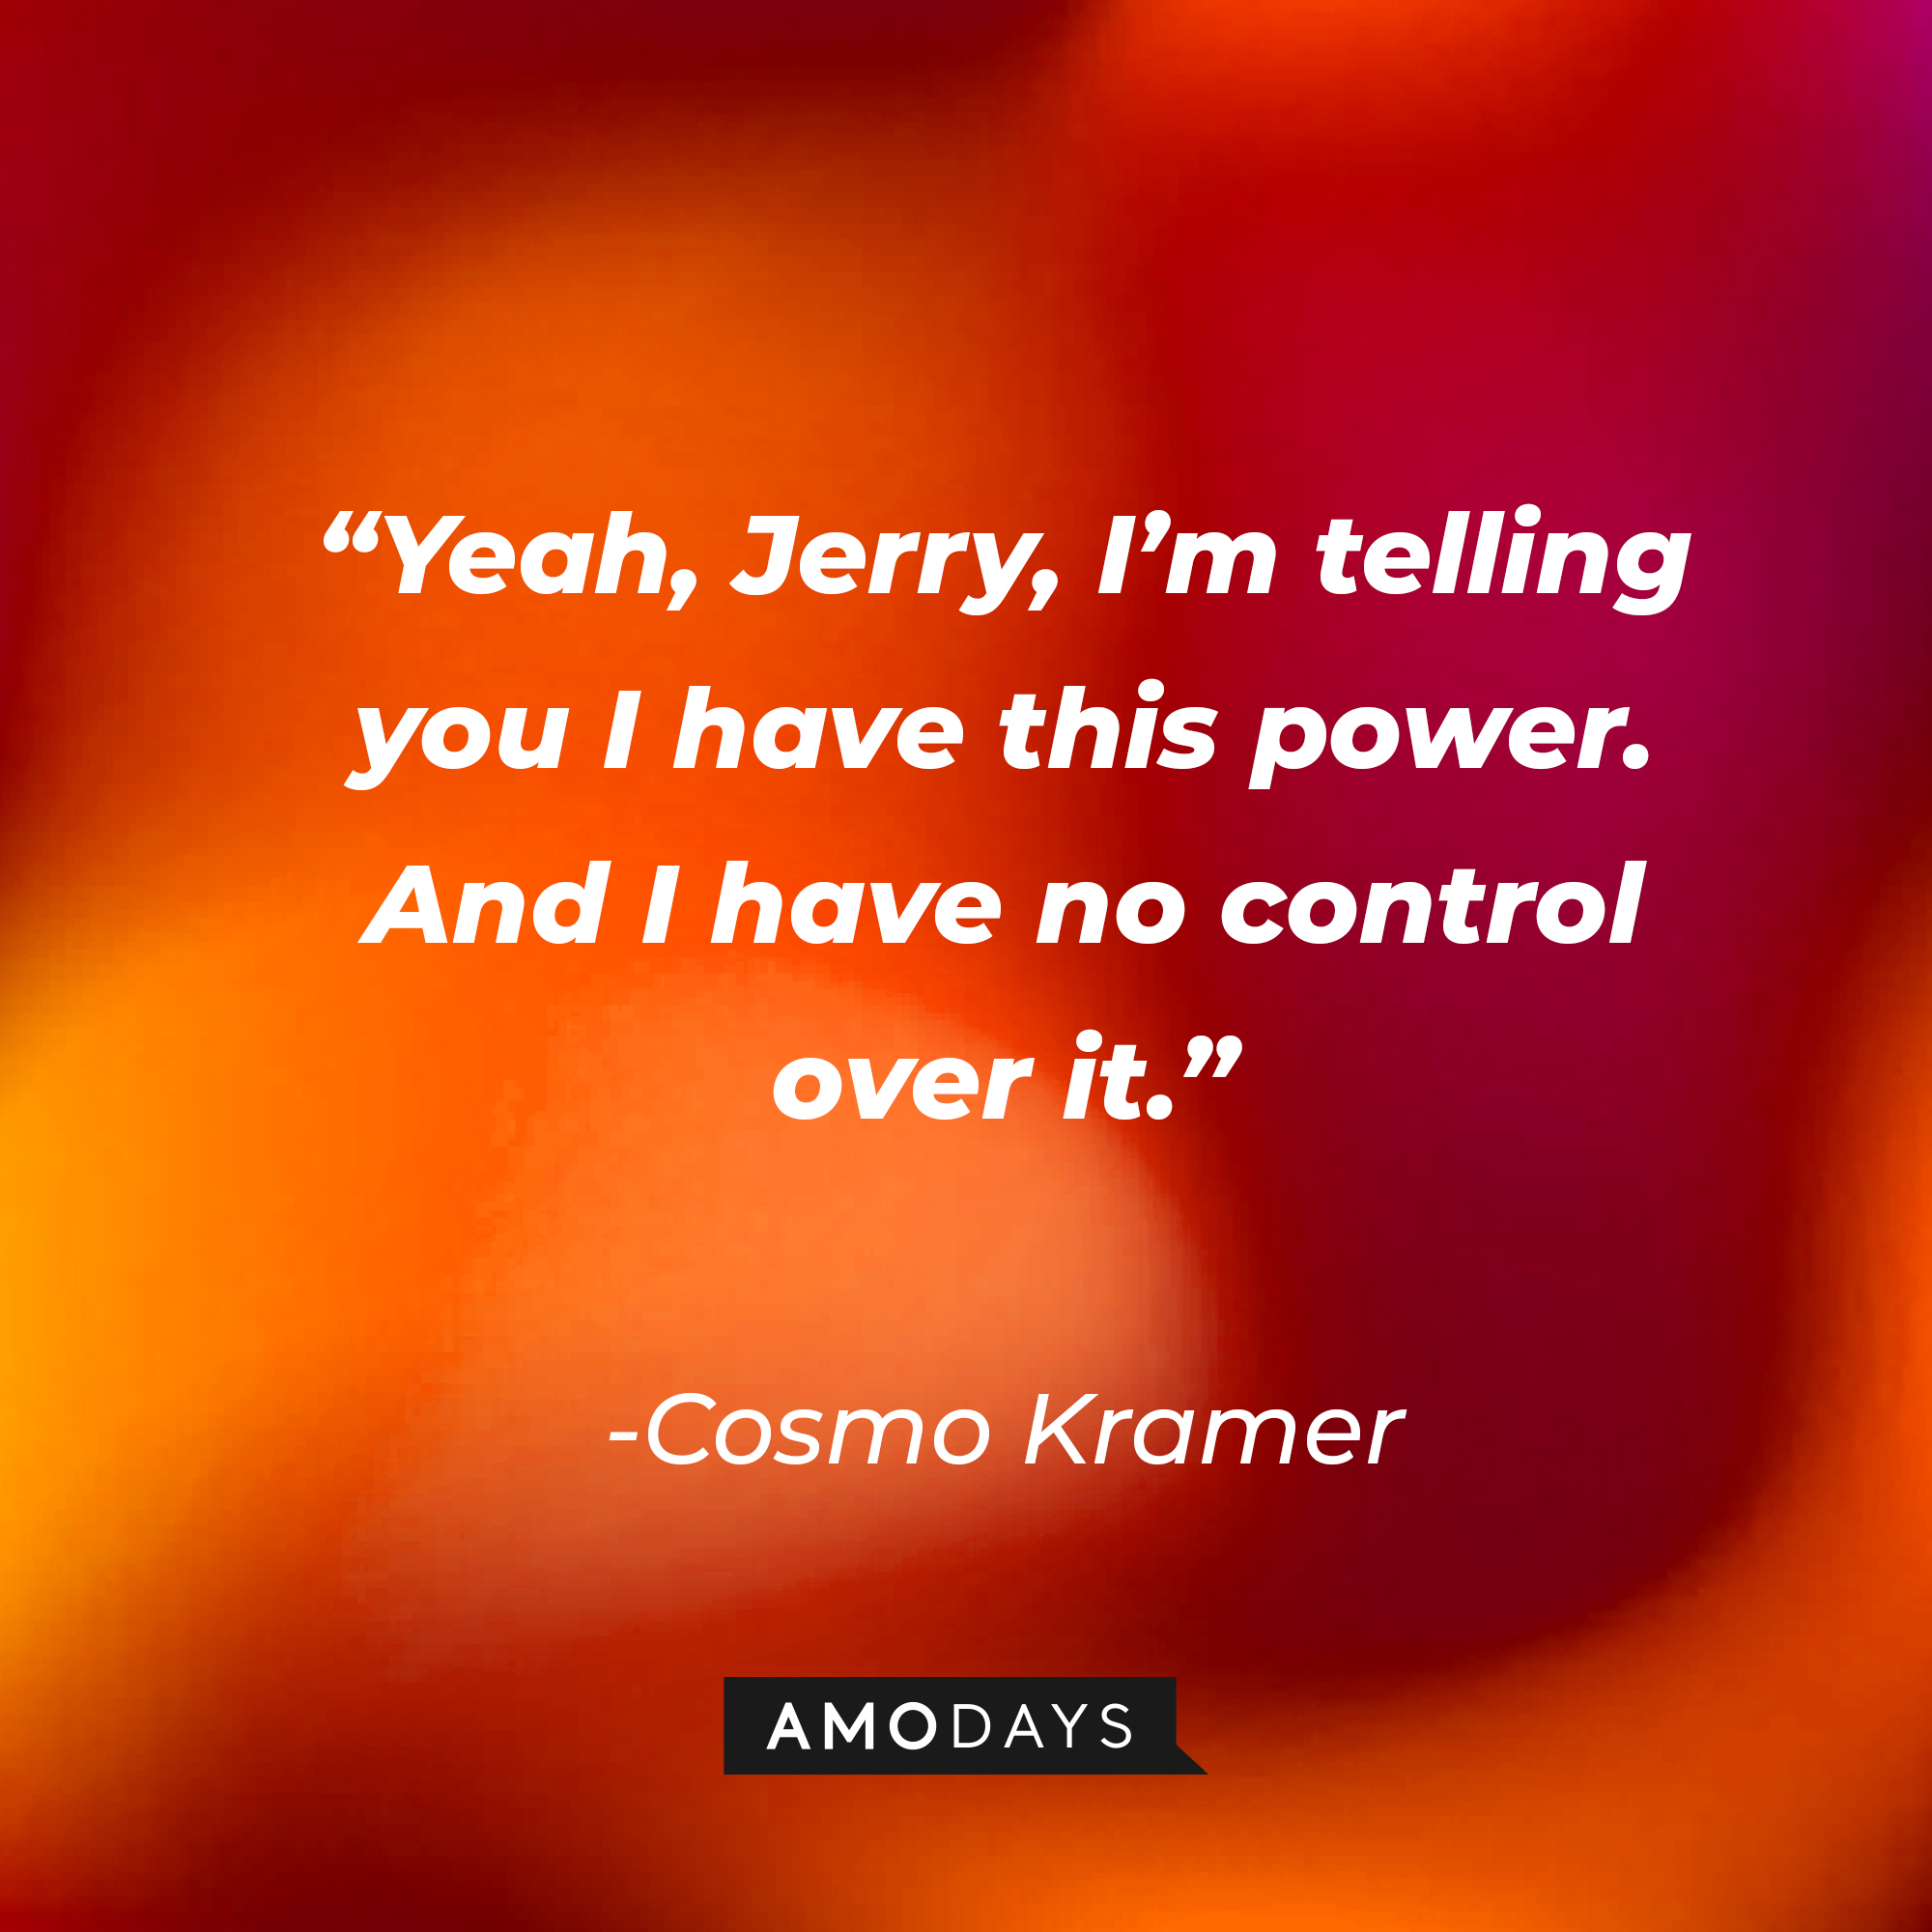 Cosmo Kramer’s quote: “Yeah, Jerry, I’m telling you I have this power. And I have no control over it.” | Source: AmoDays